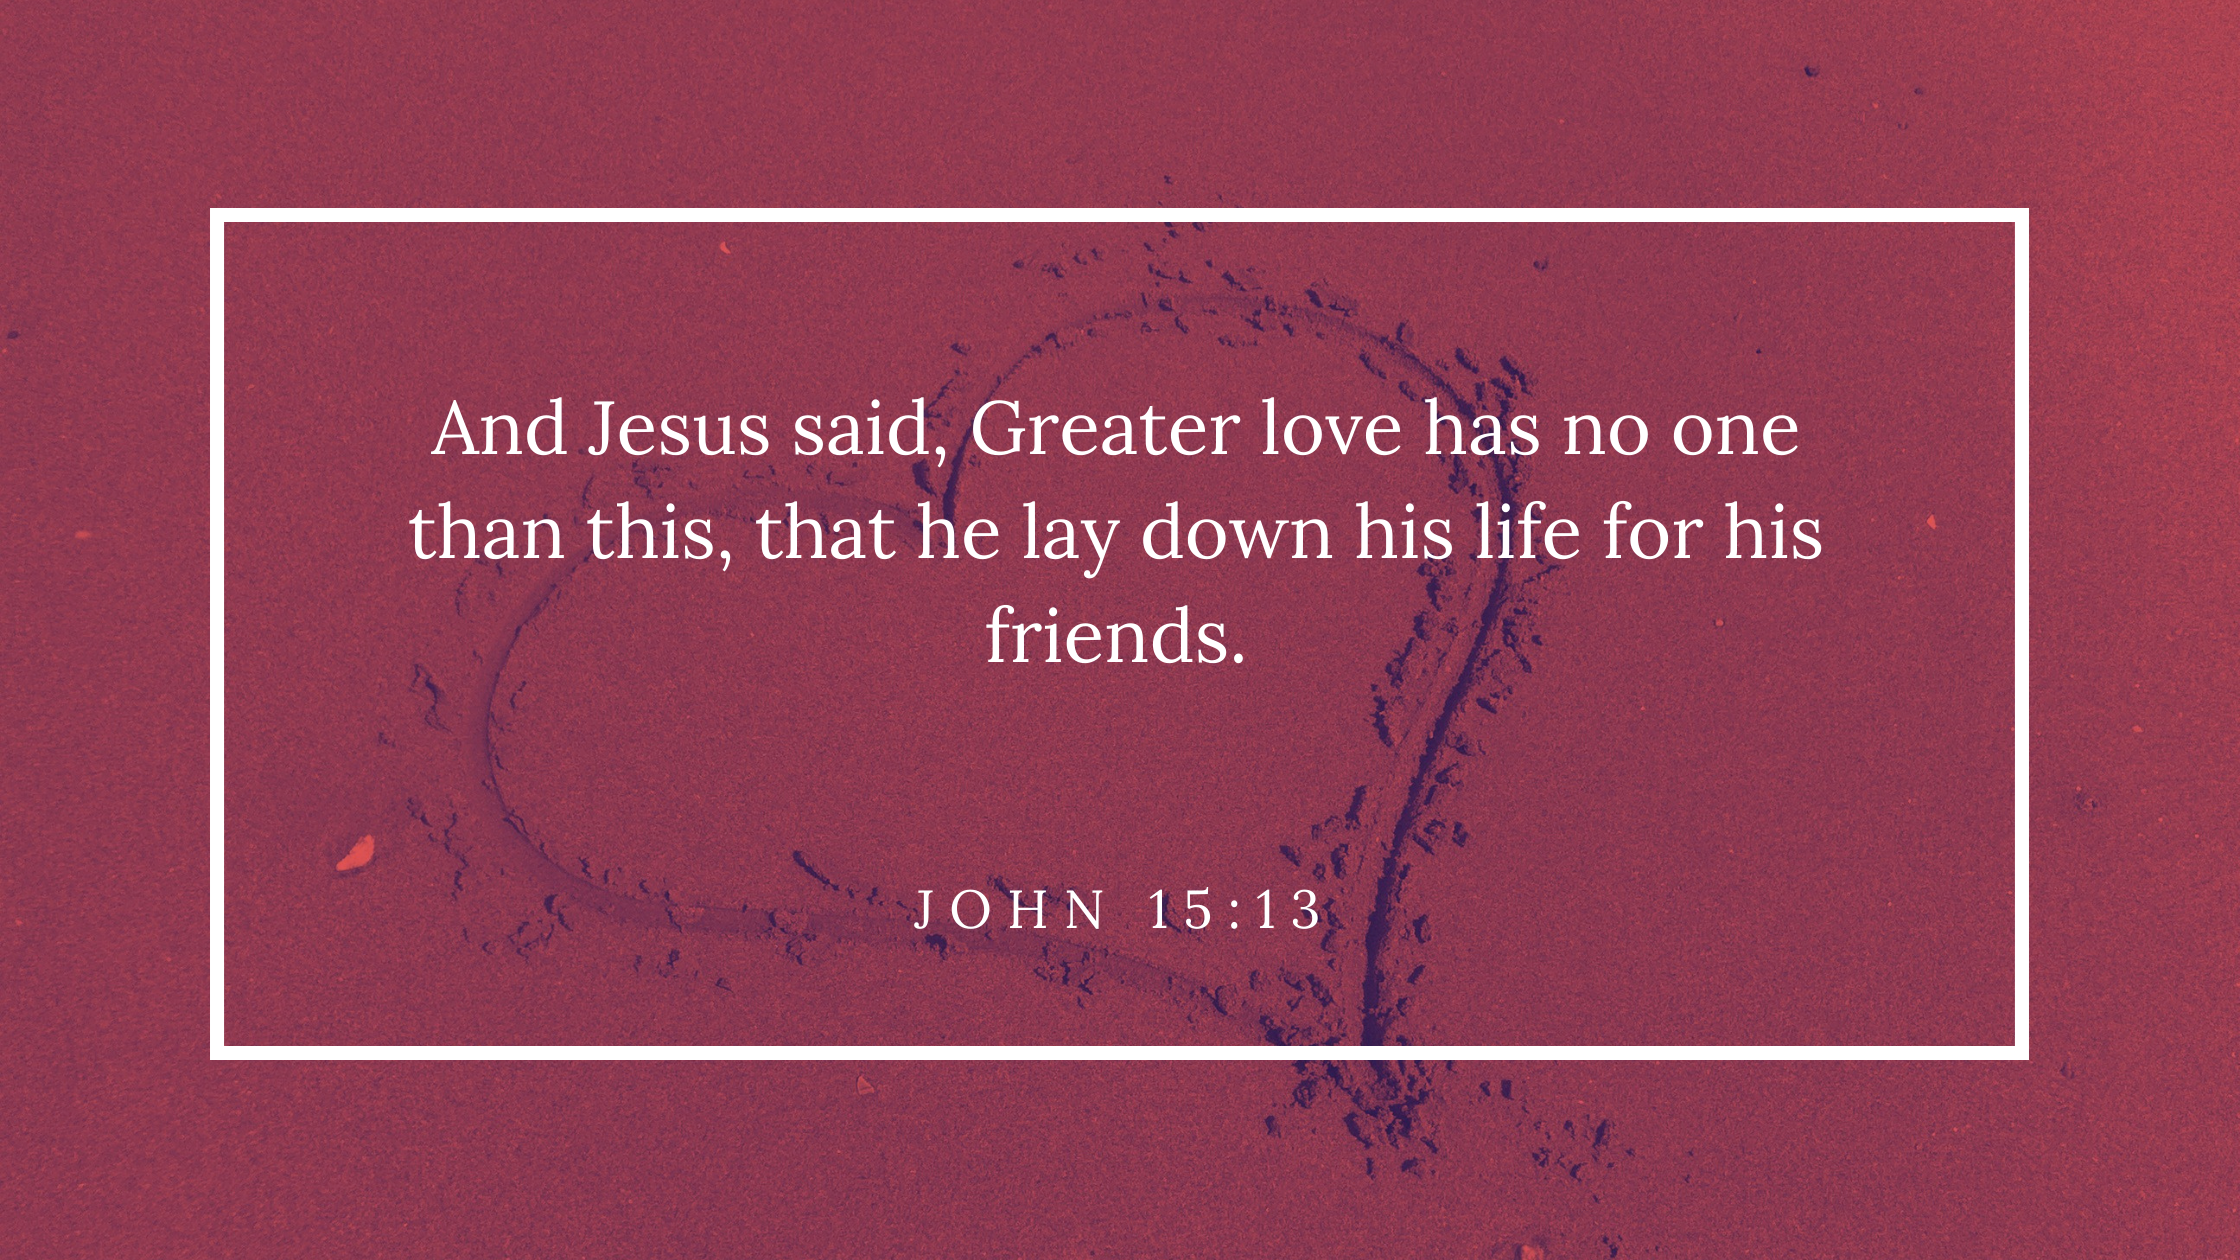 And Jesus said, Greater love has no one than this, that he lay down his life for his friends. John 1513